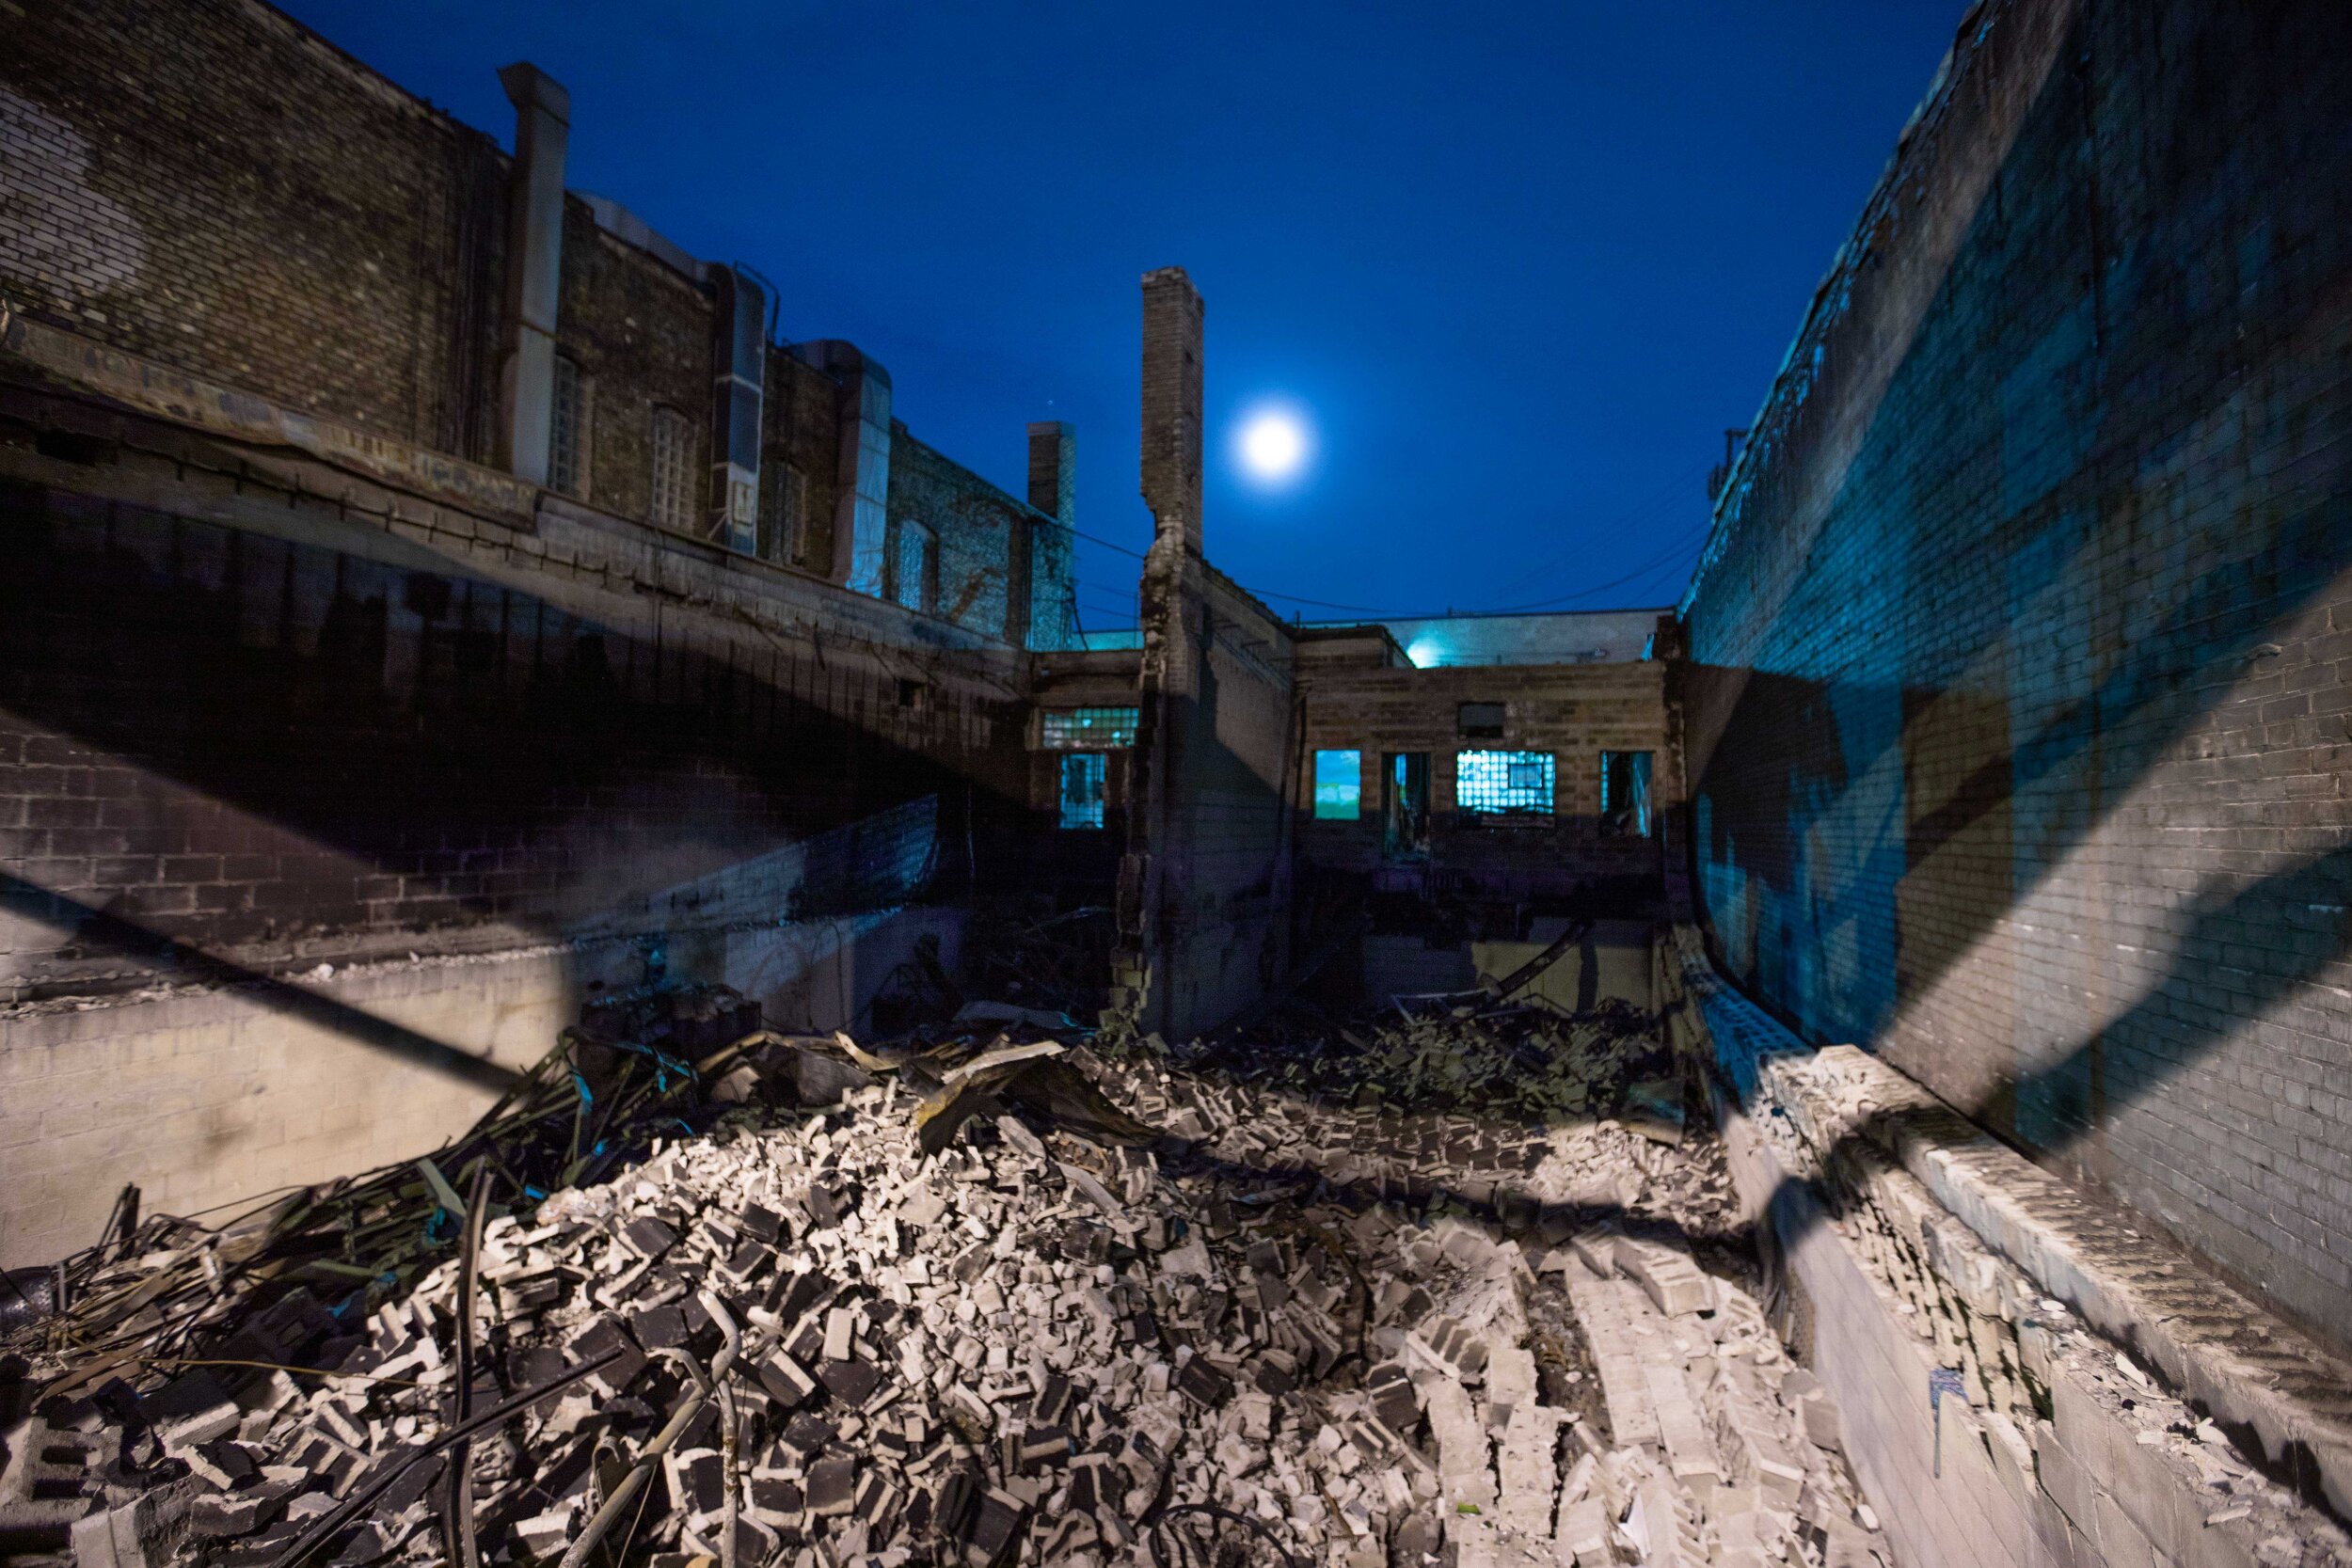  A destroyed building sits lit by street lights with the moon in the sky behind it. After riots broke out over the police killing of George Floyd this building was set on fire in Minneapolis, Minnesota on Jun 8, 2020. 